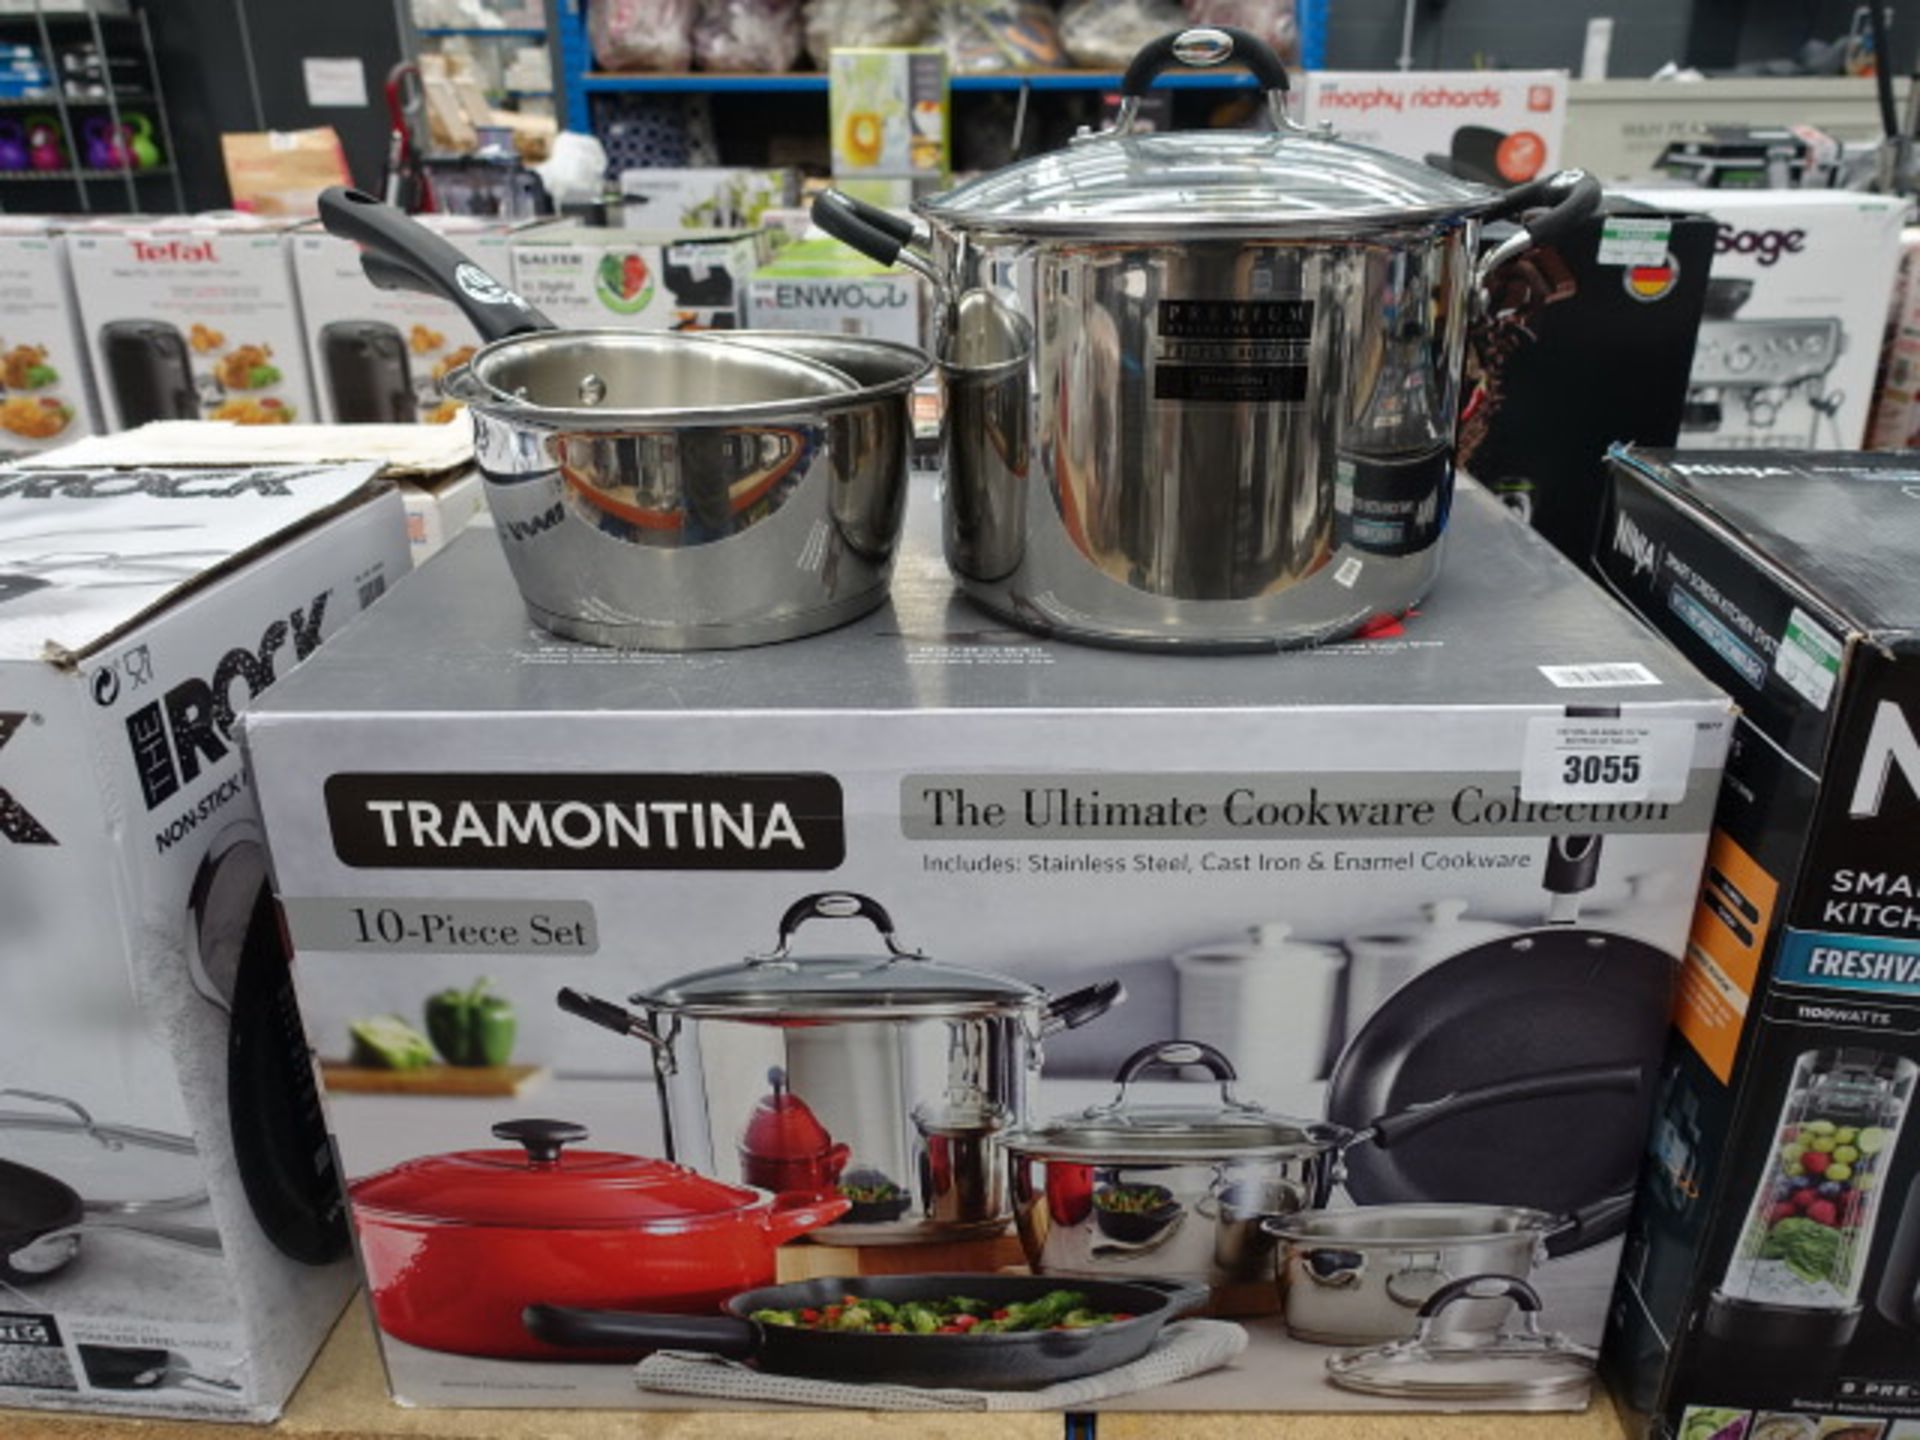 Boxed Tramontina stainless steel ultimate cookware collection set